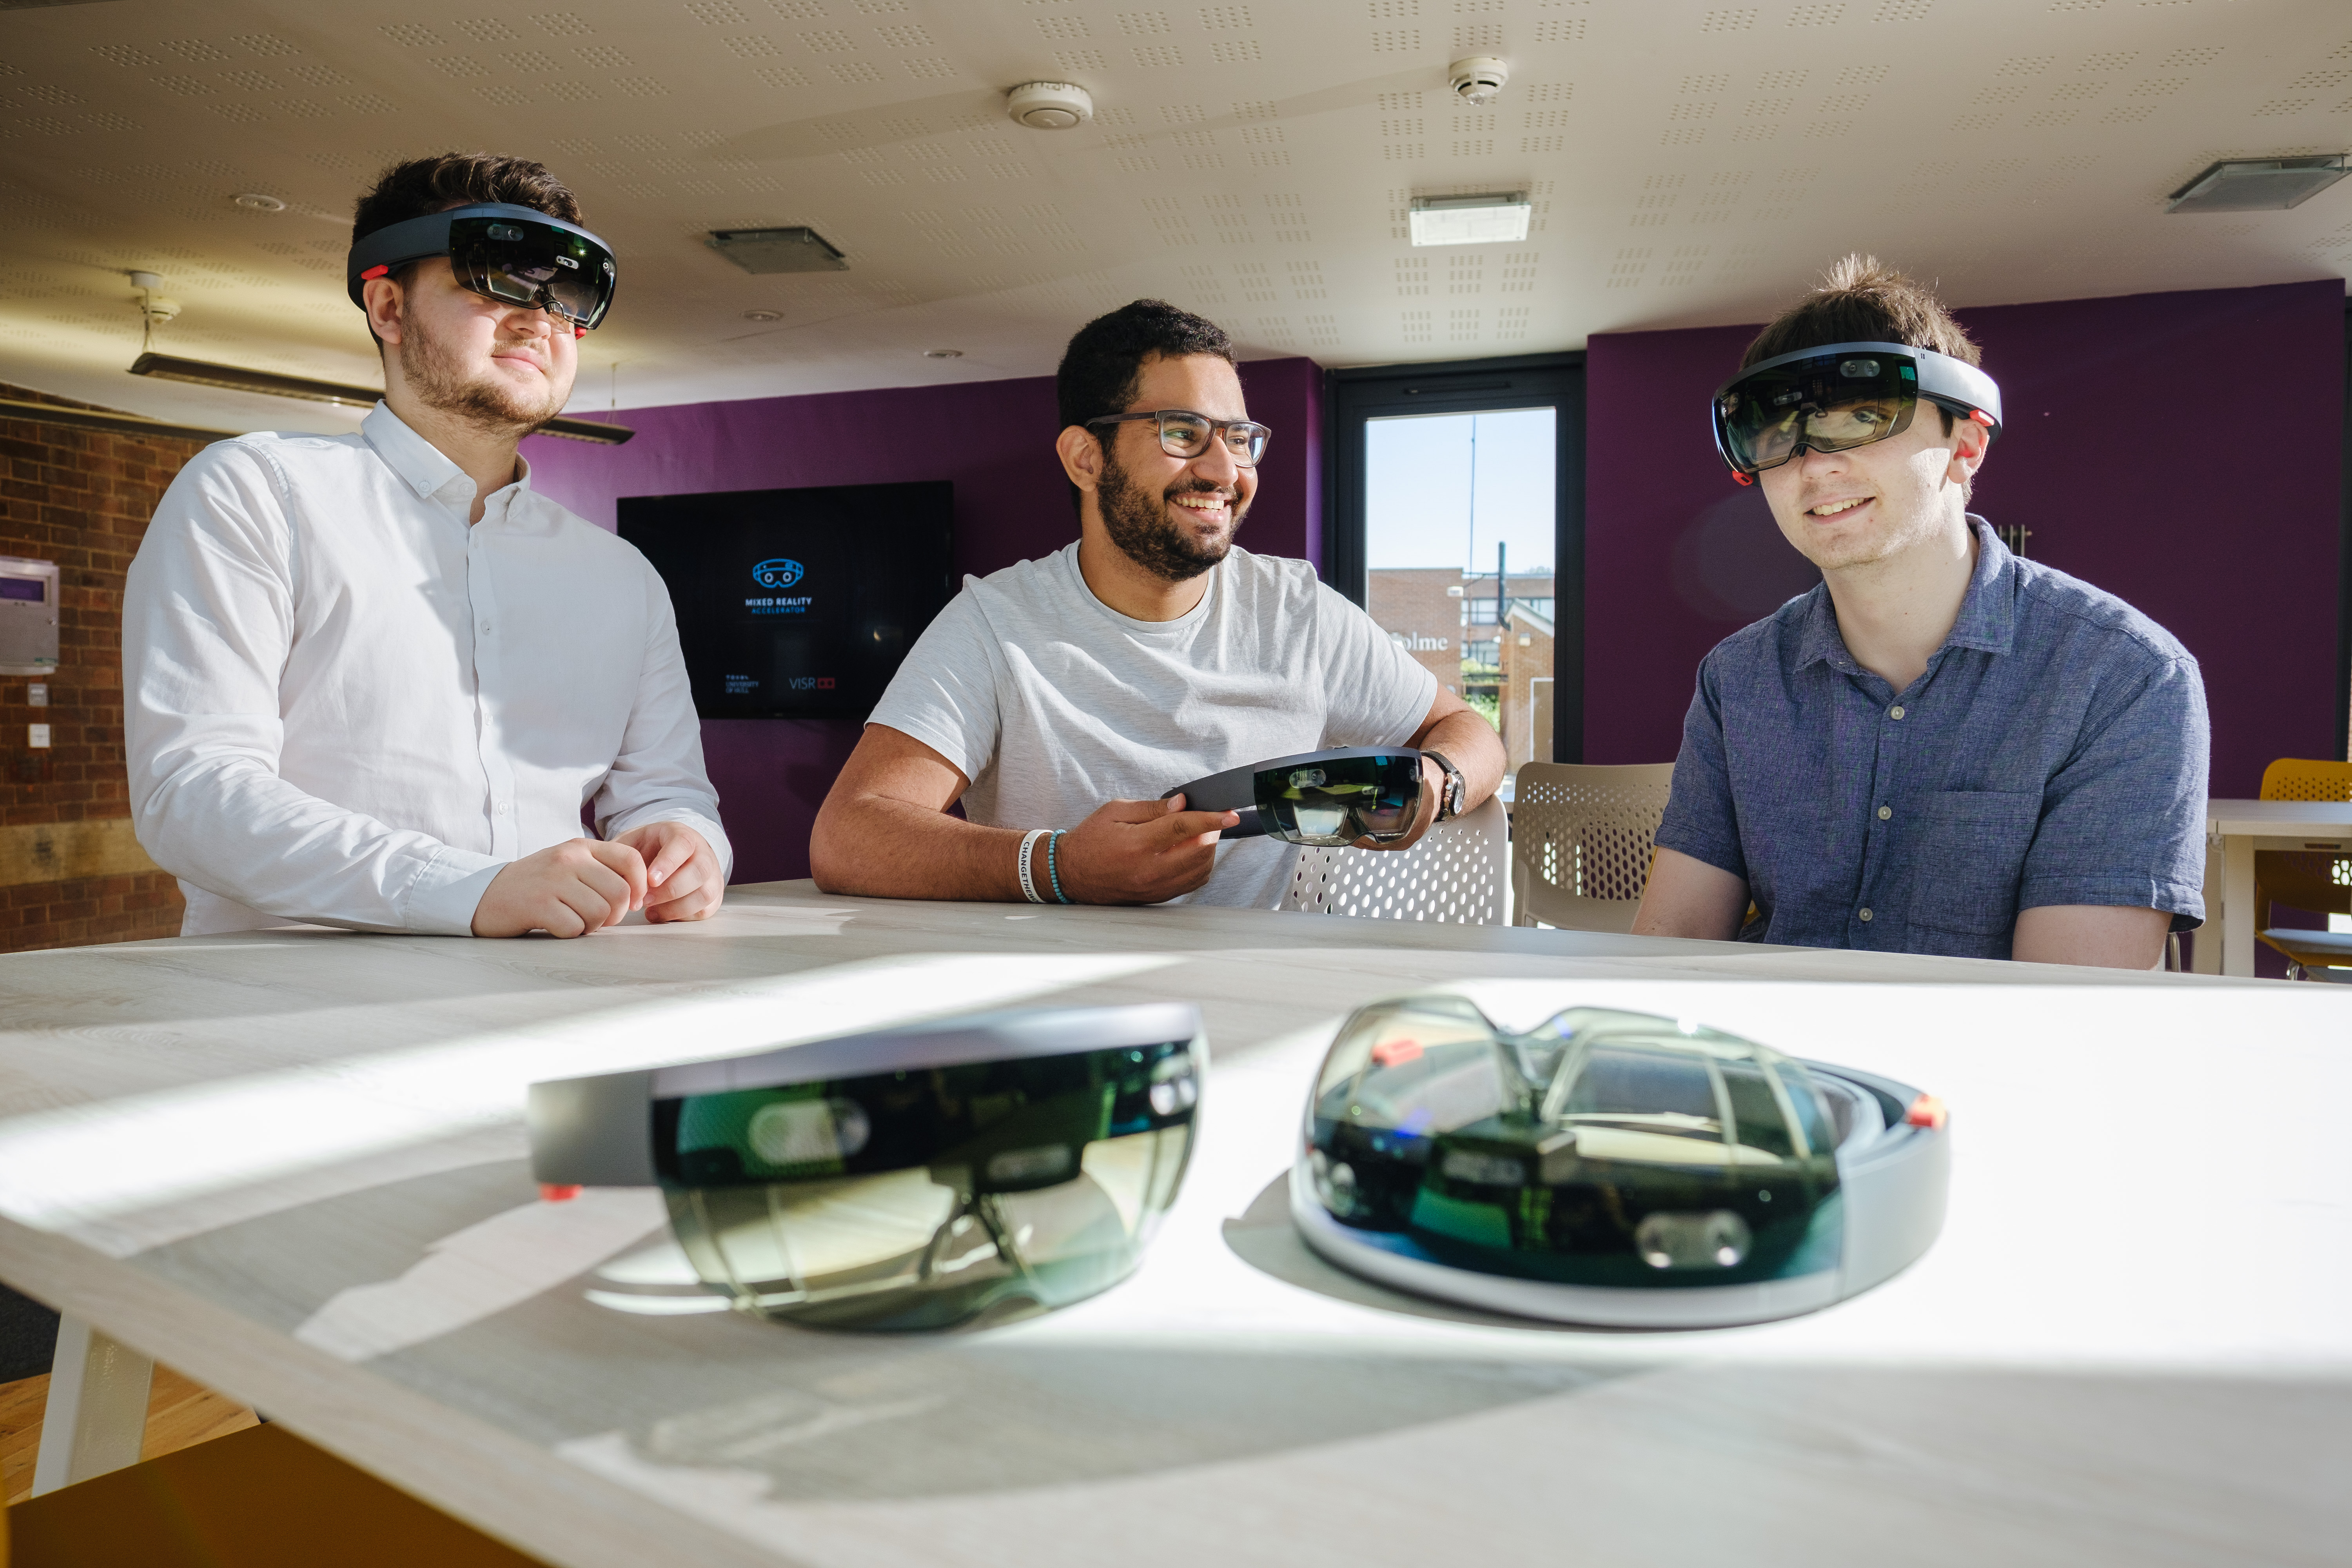 University of Hull Enterprise Centre, Kingston Upon Hull, East Yorkshire, United Kingdom, 18 June, 2018. Pictured: Students interacting with the HoloLens/VERTX technology being pioneered by the VISR.